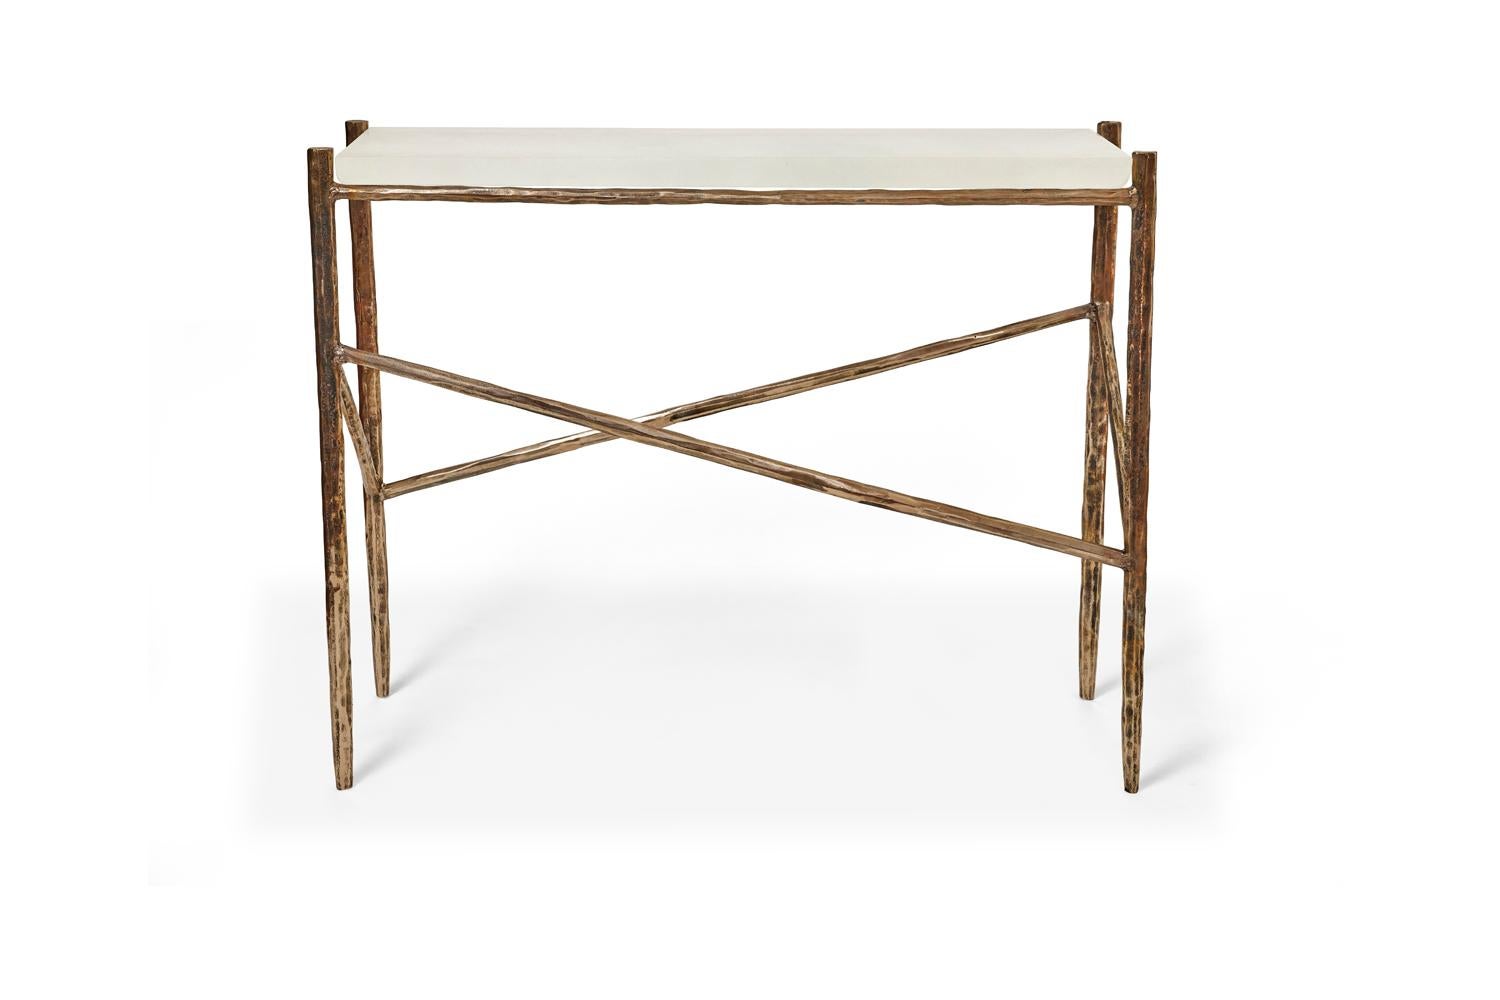 Gregory Nangle
Torsion table, 2021
Cast bronze and crystal
Measures: 37.25 x 45.75 x 12.5 in.